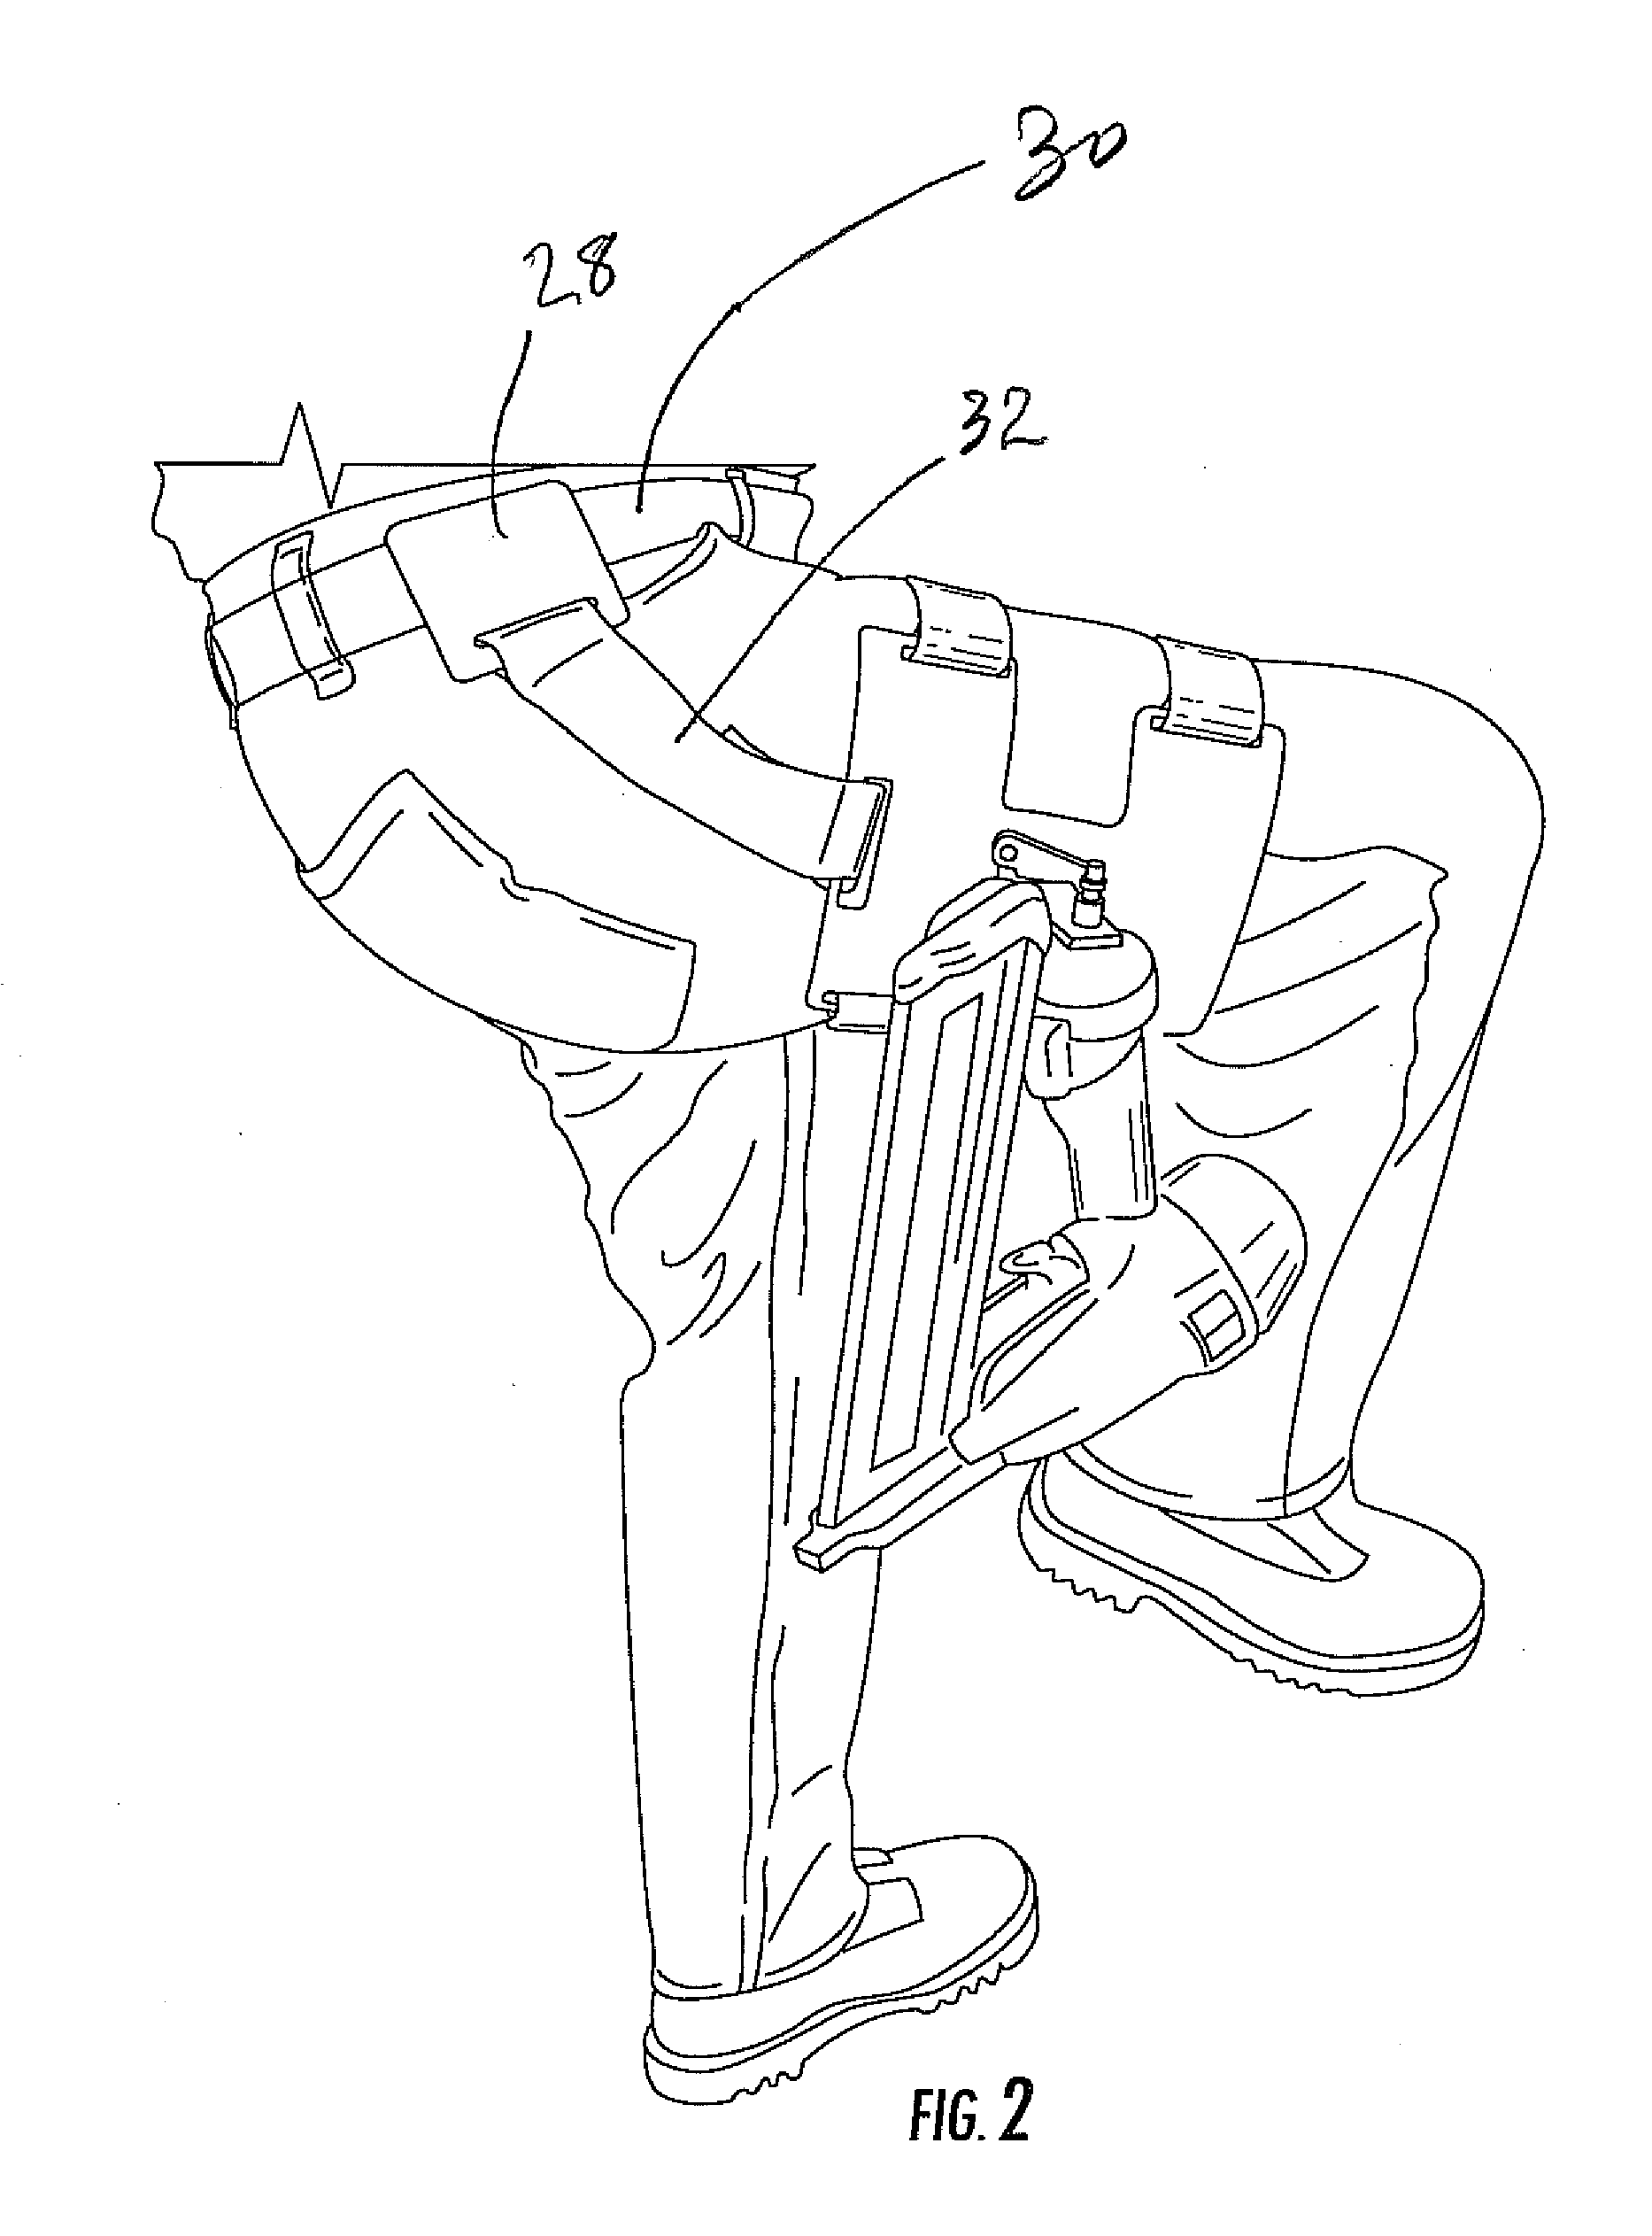 Tool holster for attachment to leg